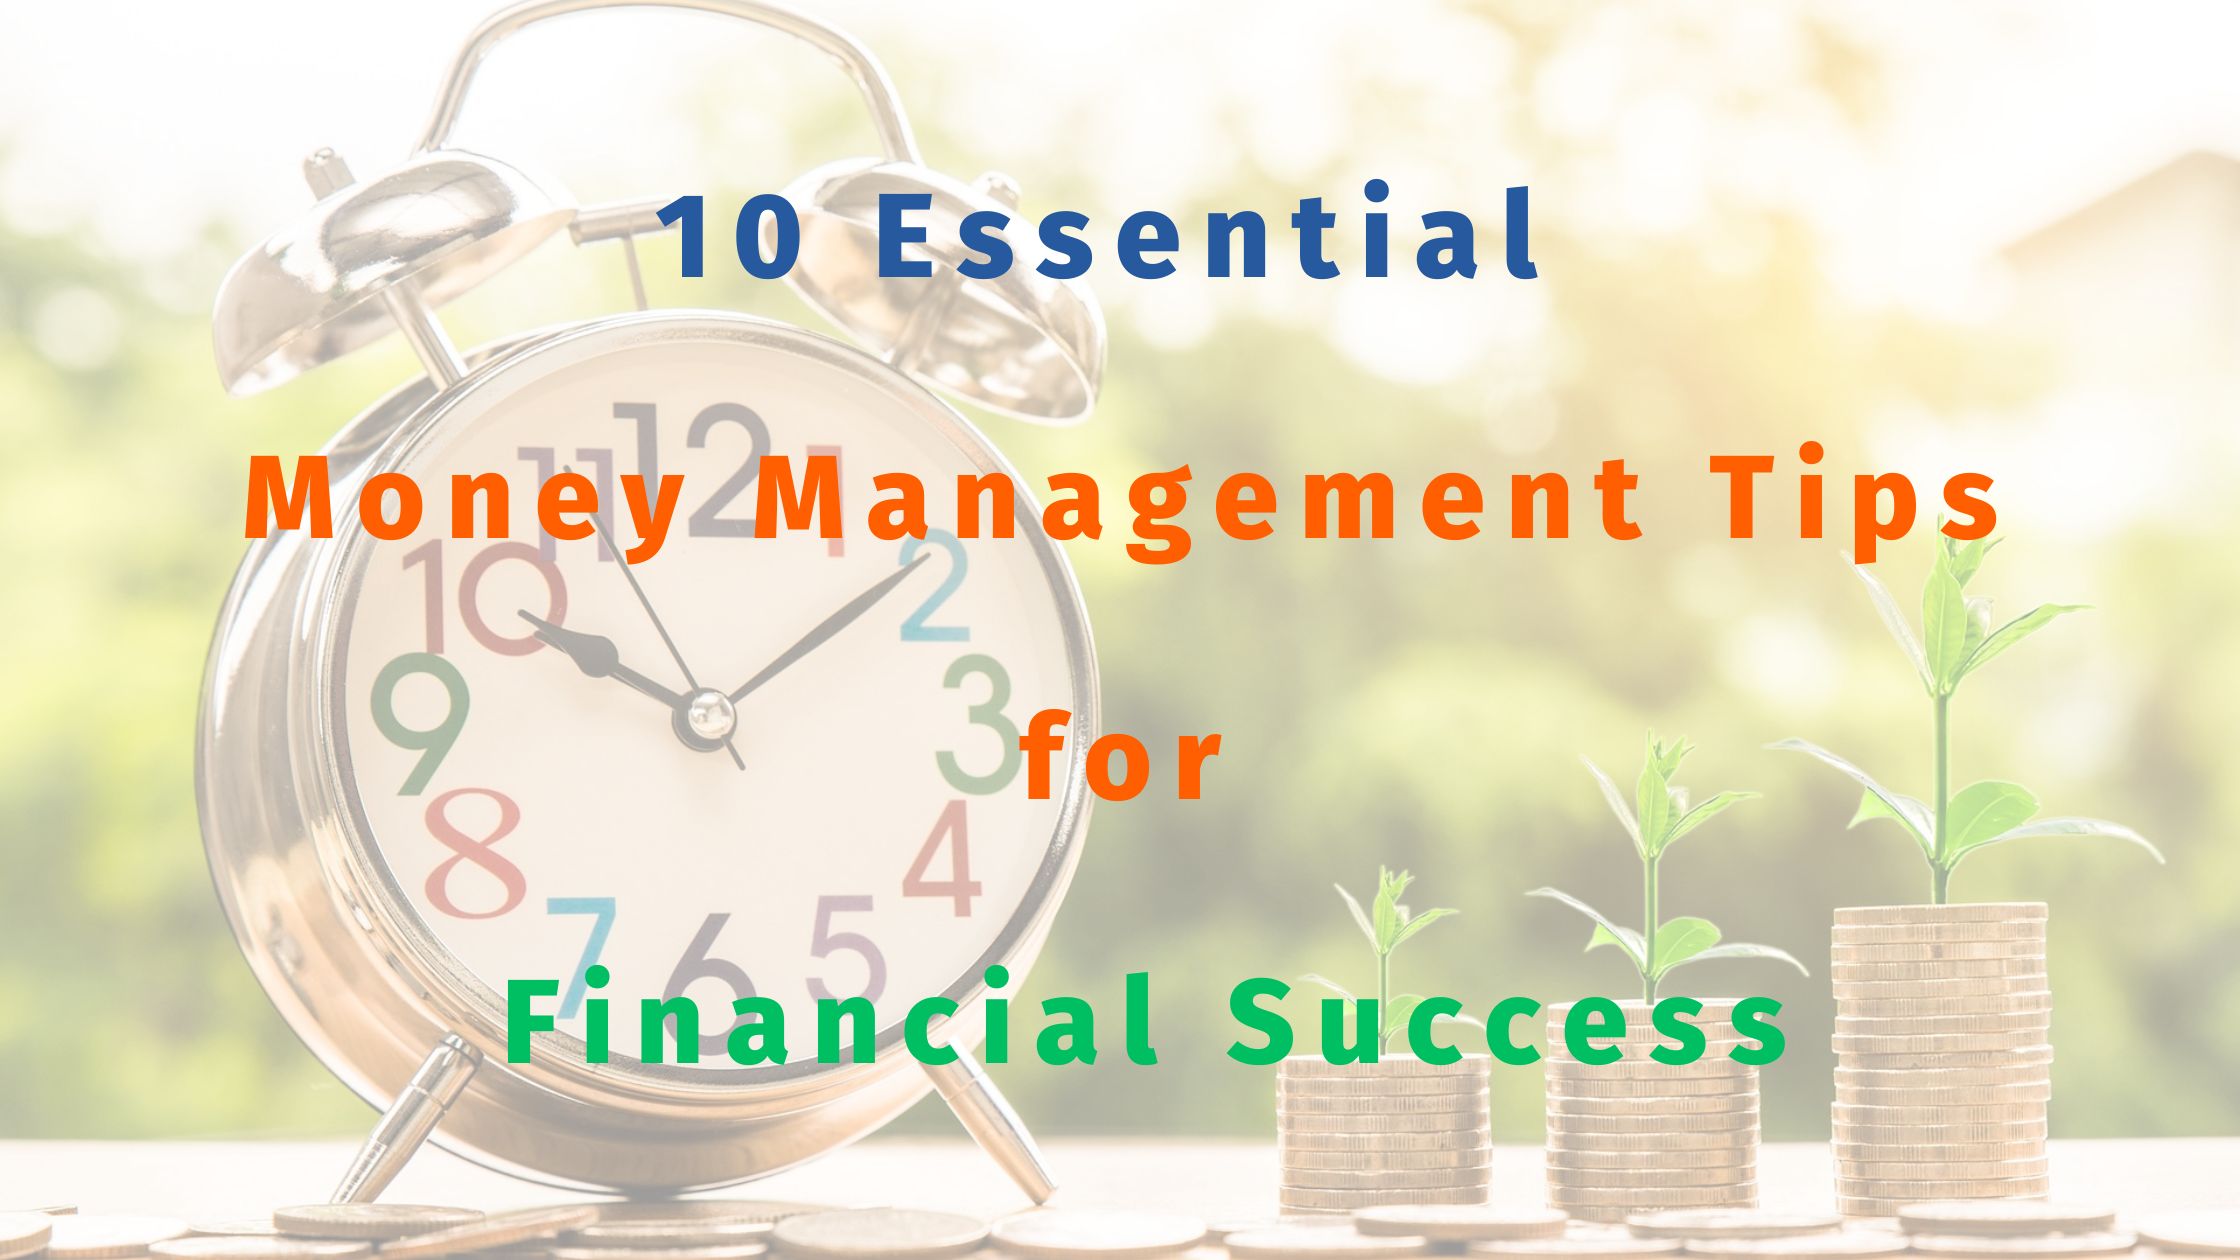 You are currently viewing 10 Essential Money Management Tips for Financial Success